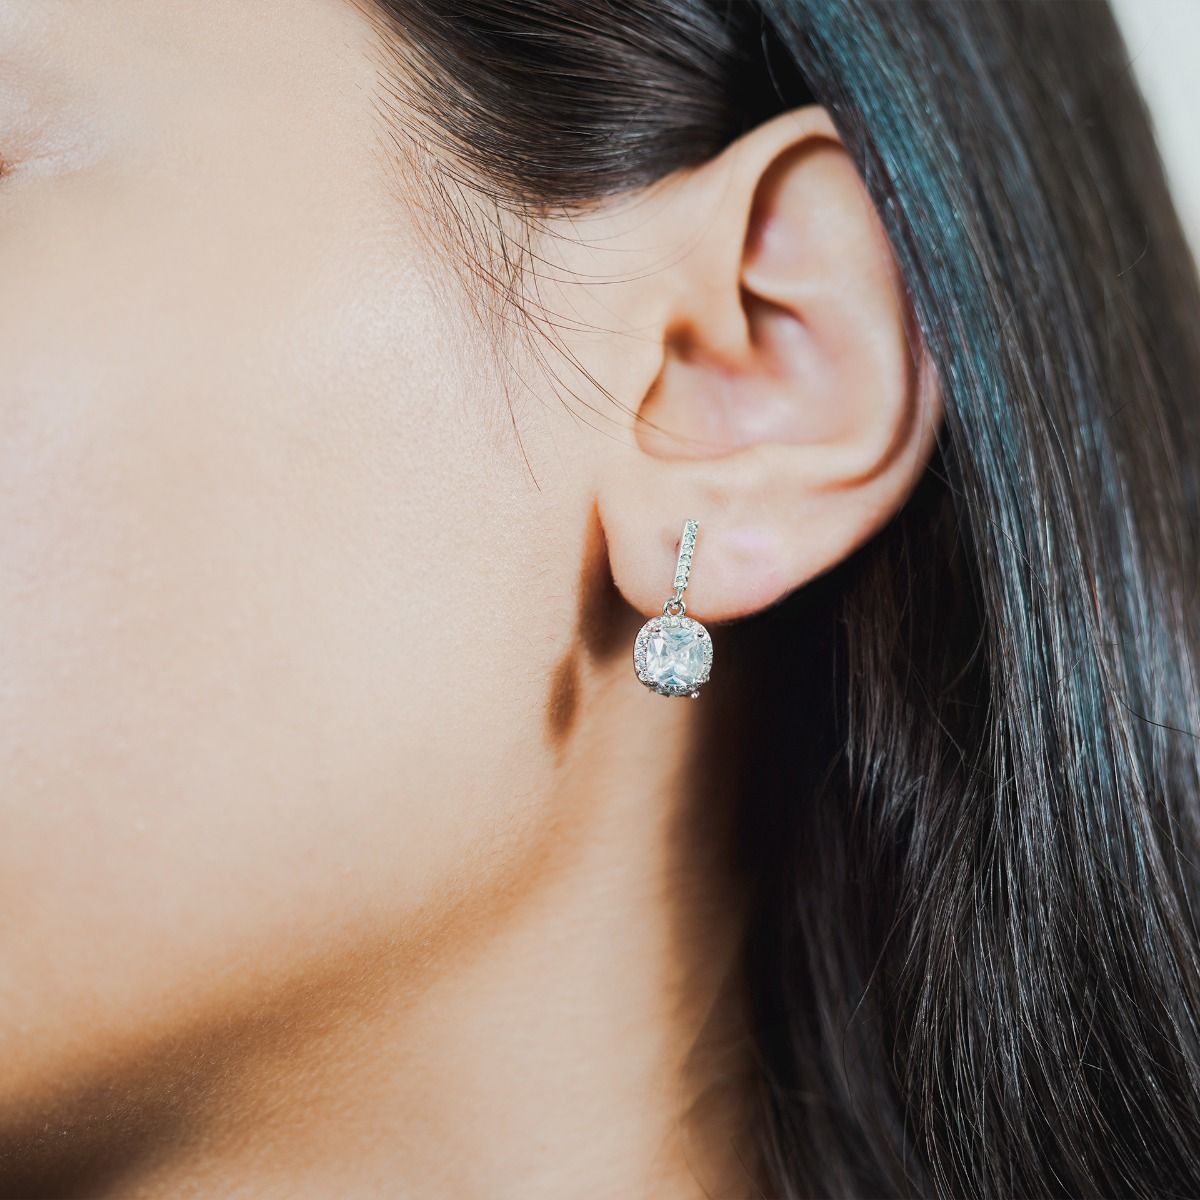 These striking stud drop earrings are set with flawlessly cut cubic zirconia stones, surrounding a dazzling clear cushion cut centre stone. Wear to add timeless glamour to any look.